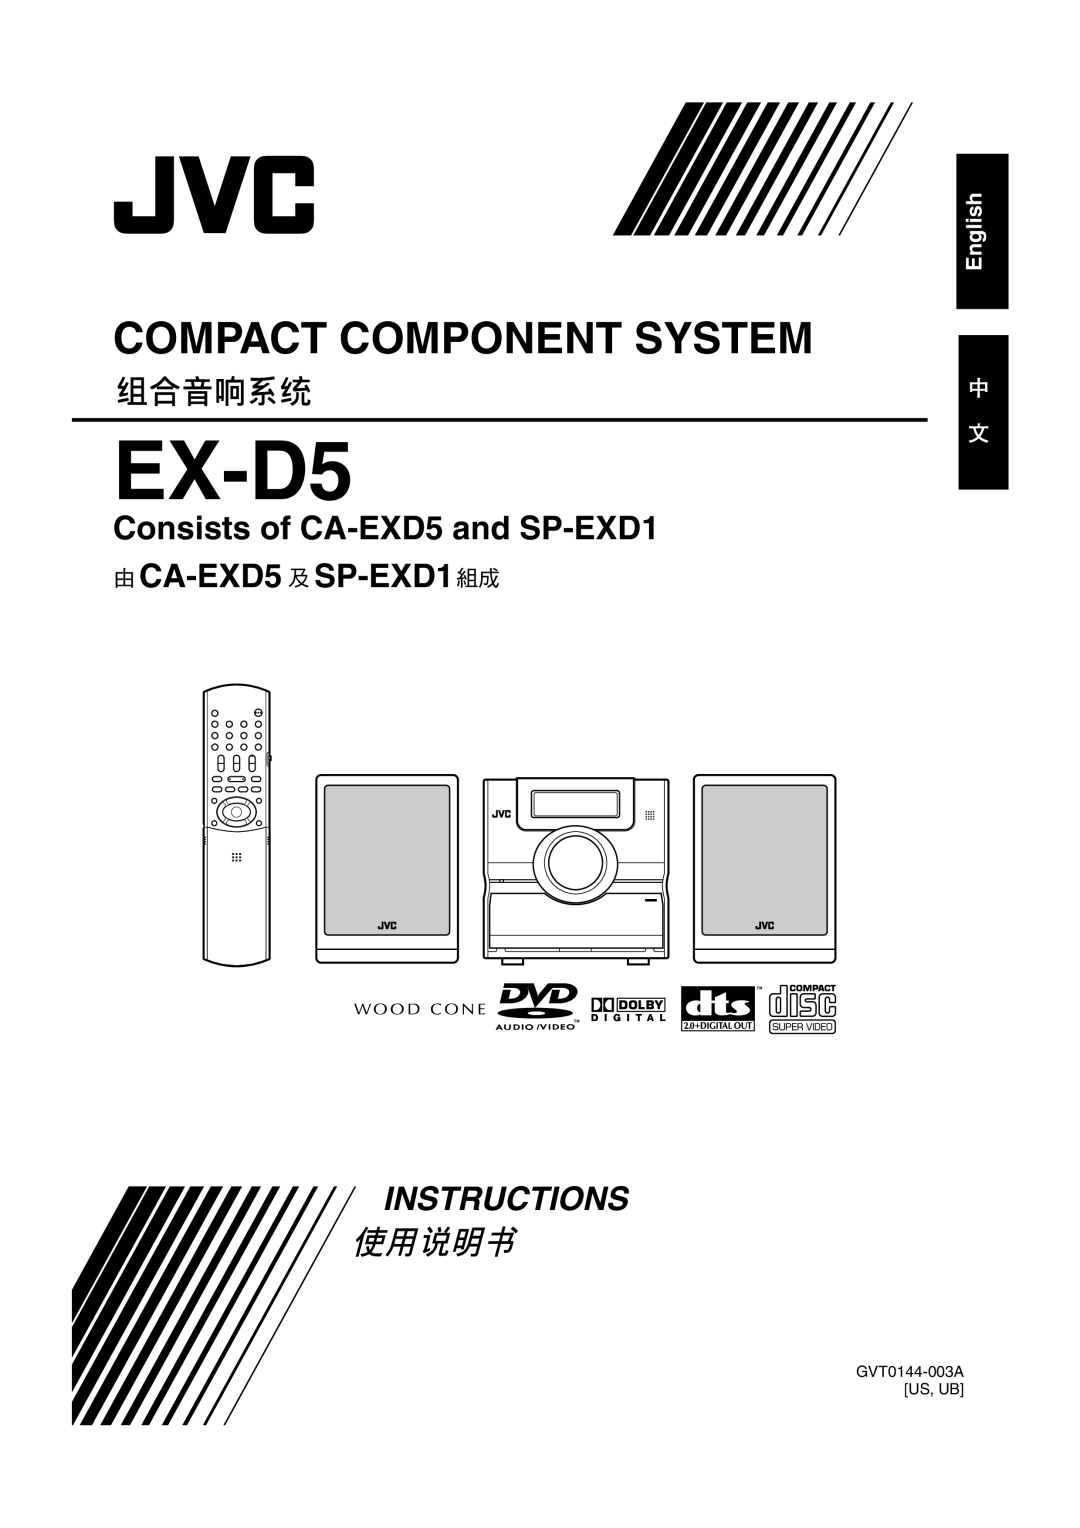 JVC GVT0144-005A Consists of CA-EXD5and SP-EXD1 CA-EXD5 SP-EXD1, English, EX-D5, Compact Component System, Instructions 